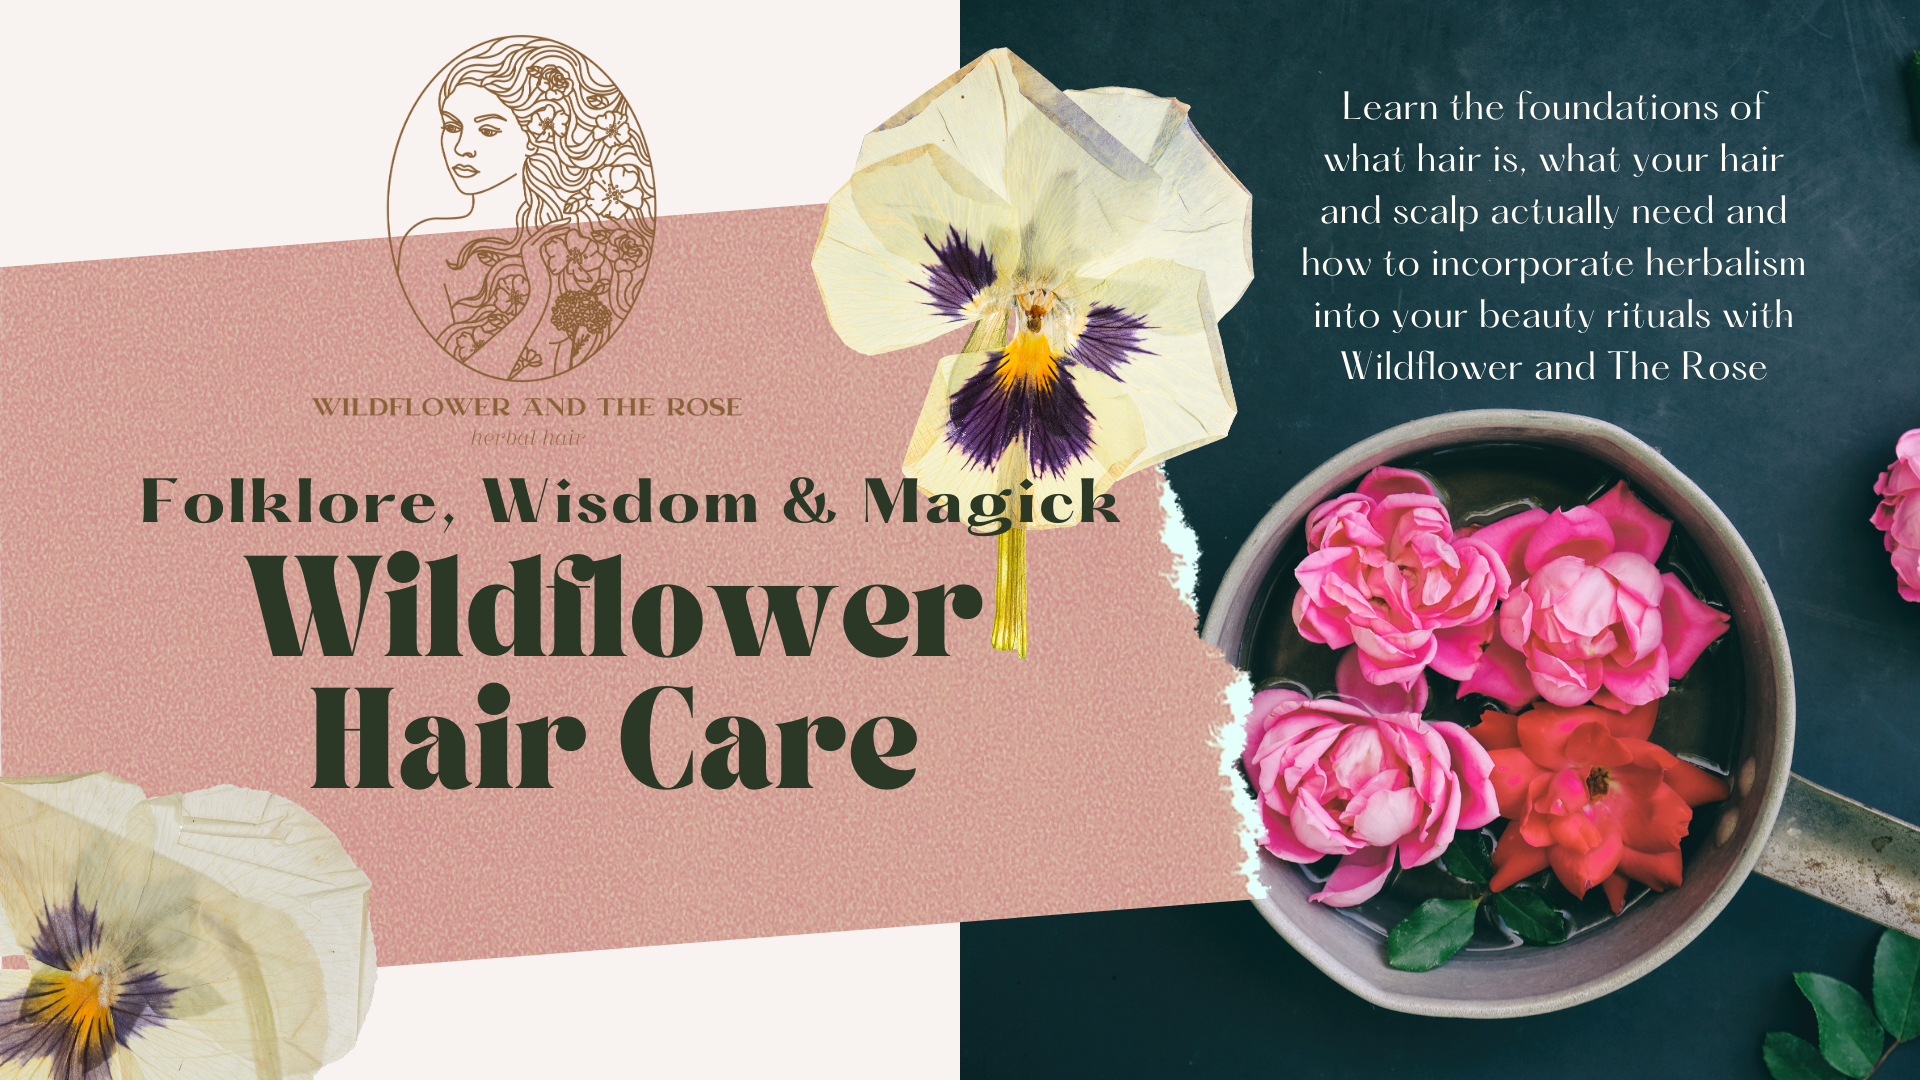 Folklore of Wildflower and The Rose Hair Care Workshop